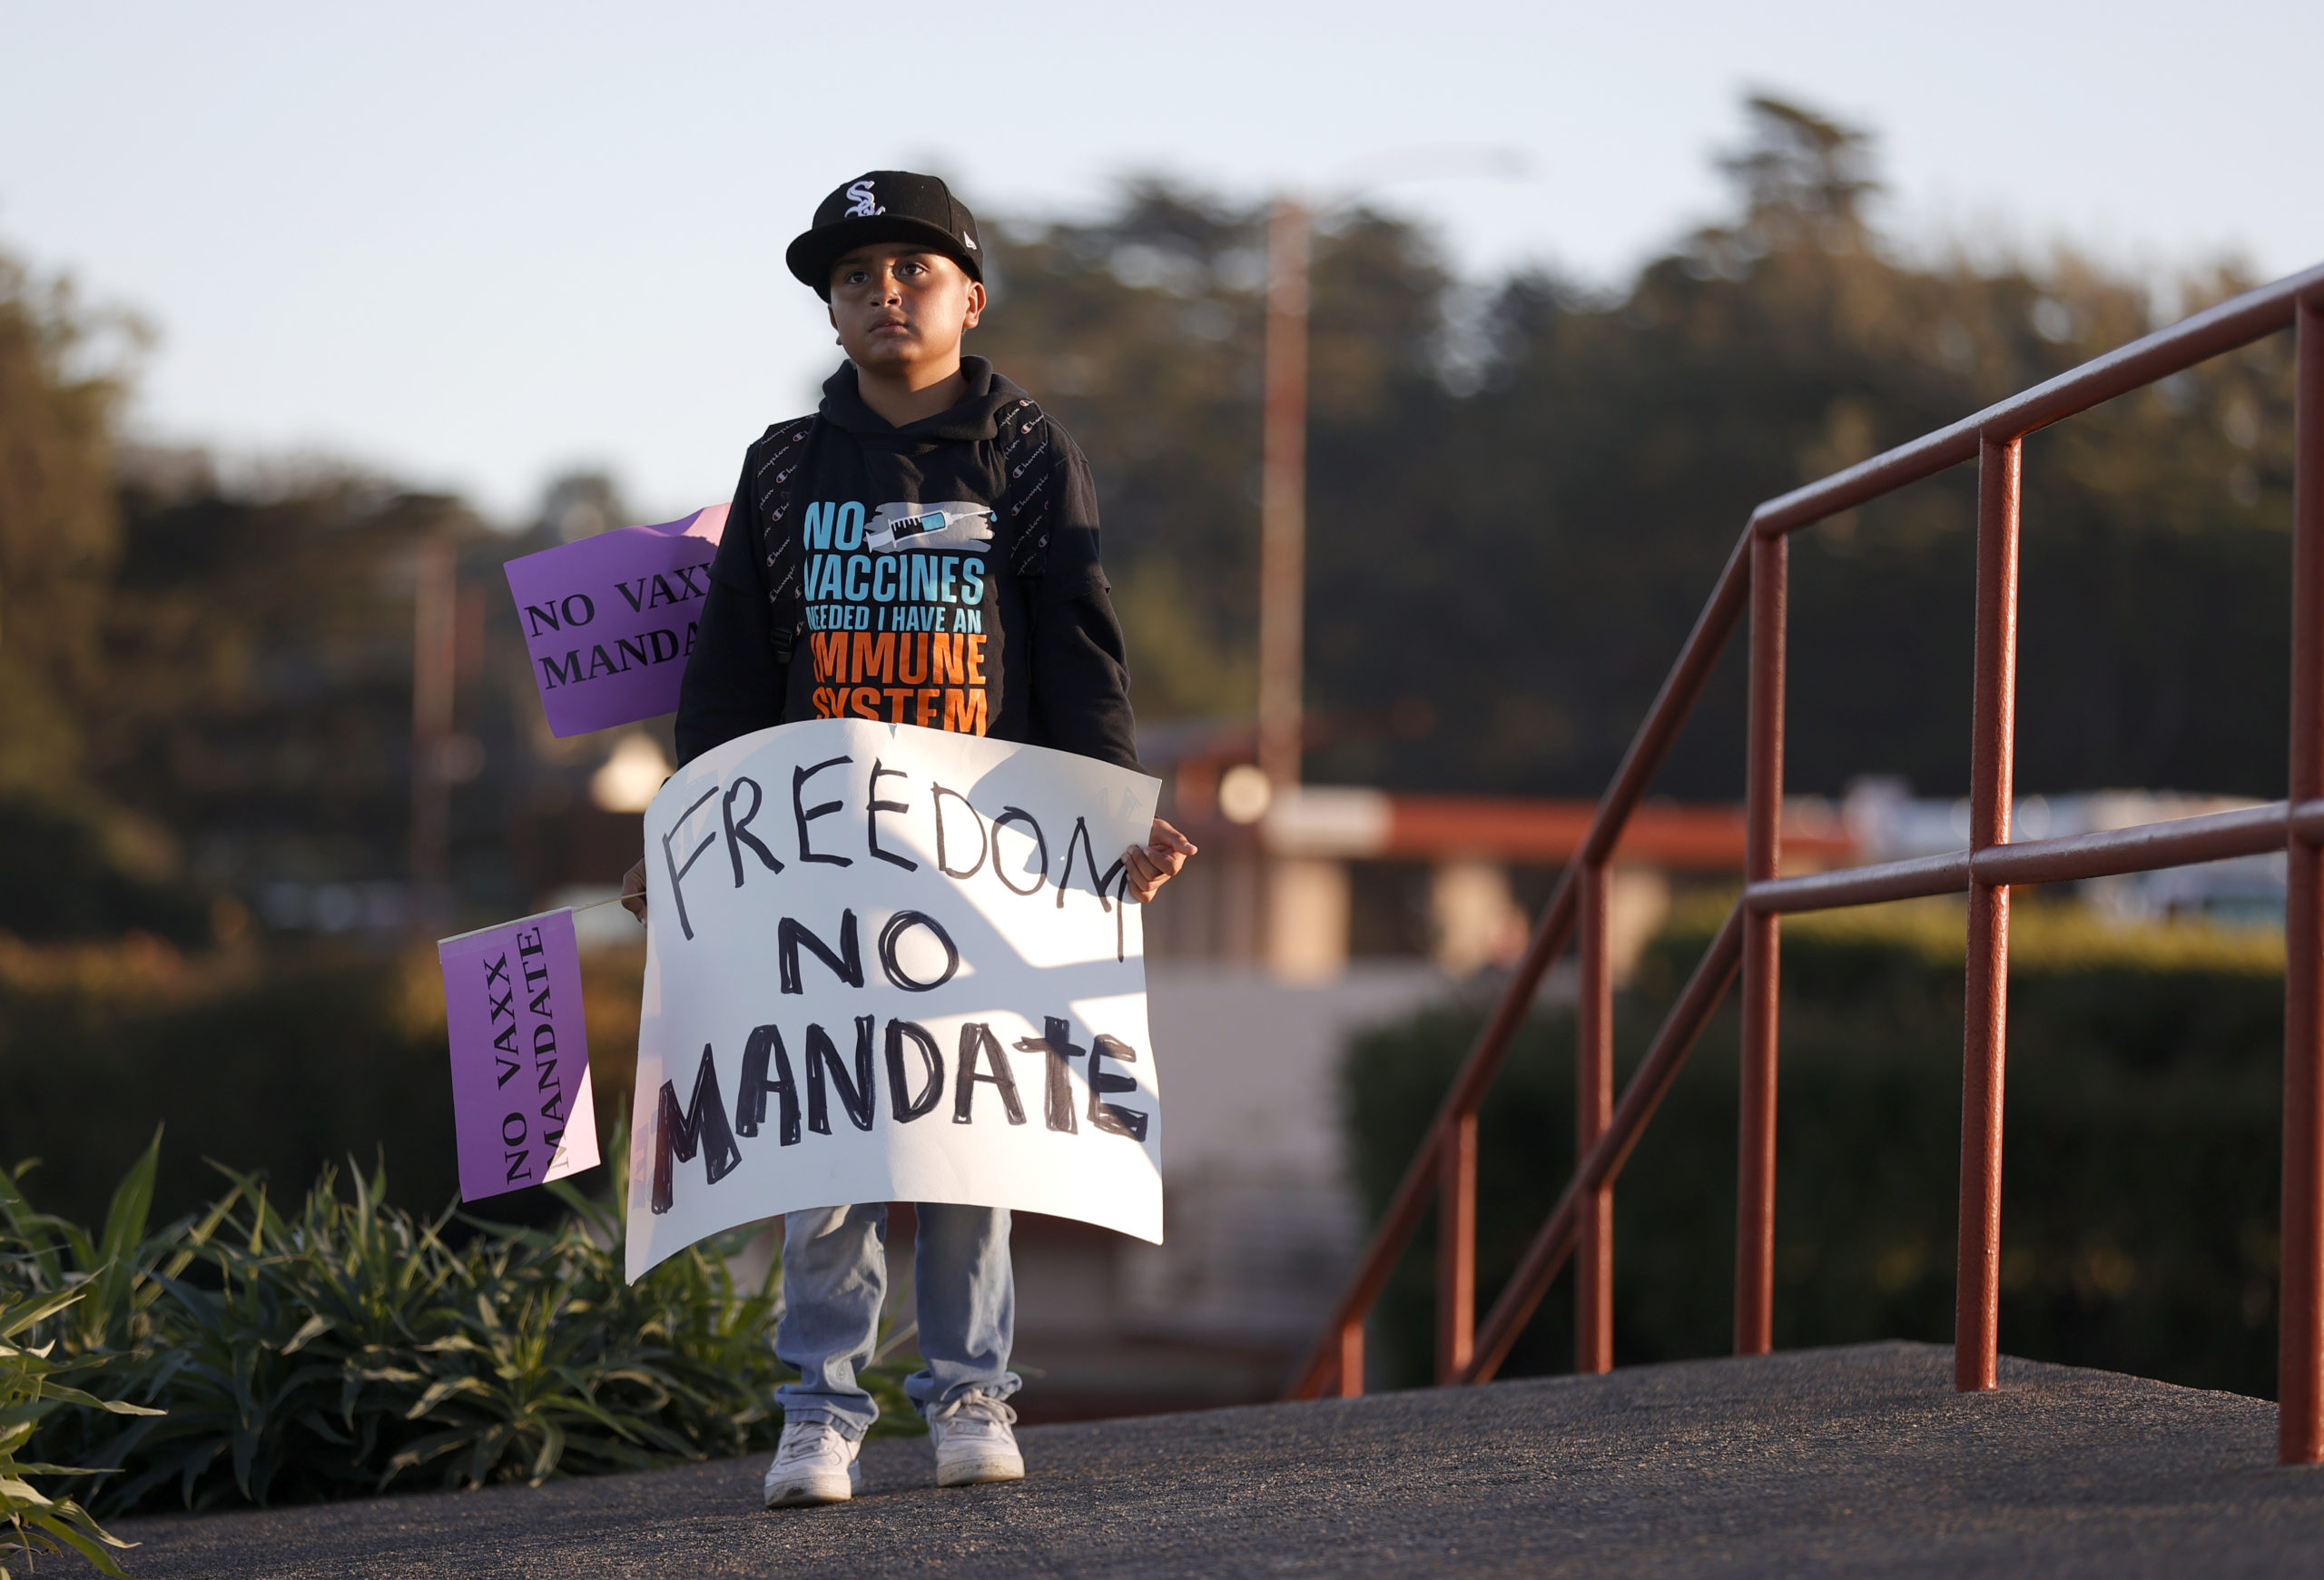 A young boy holds a sign during an anti-vaccination rally at the Golden Gate Bridge on November 11, 2021 in San Francisco, California. Protesters against the COVID-19 vaccination gathered at the Golden Gate Bridge to rally against vaccine mandates. (Photo by Justin Sullivan/Getty Images)